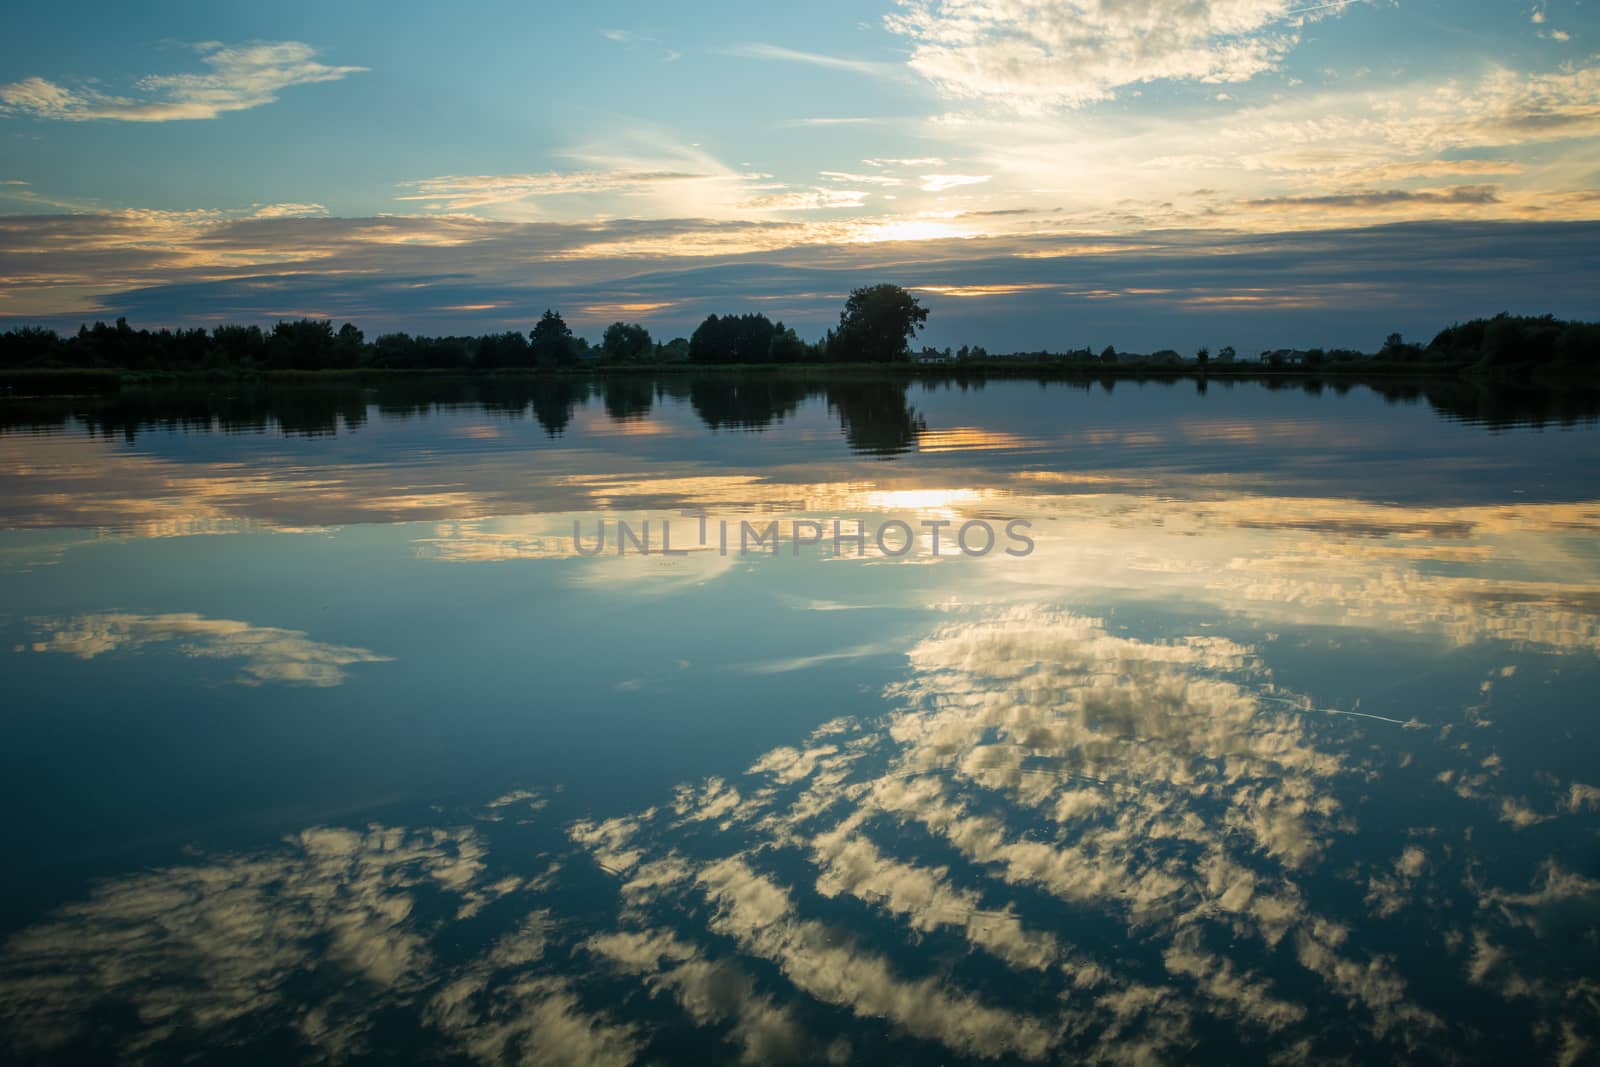 The reflection of clouds on the surface of the lake by darekb22